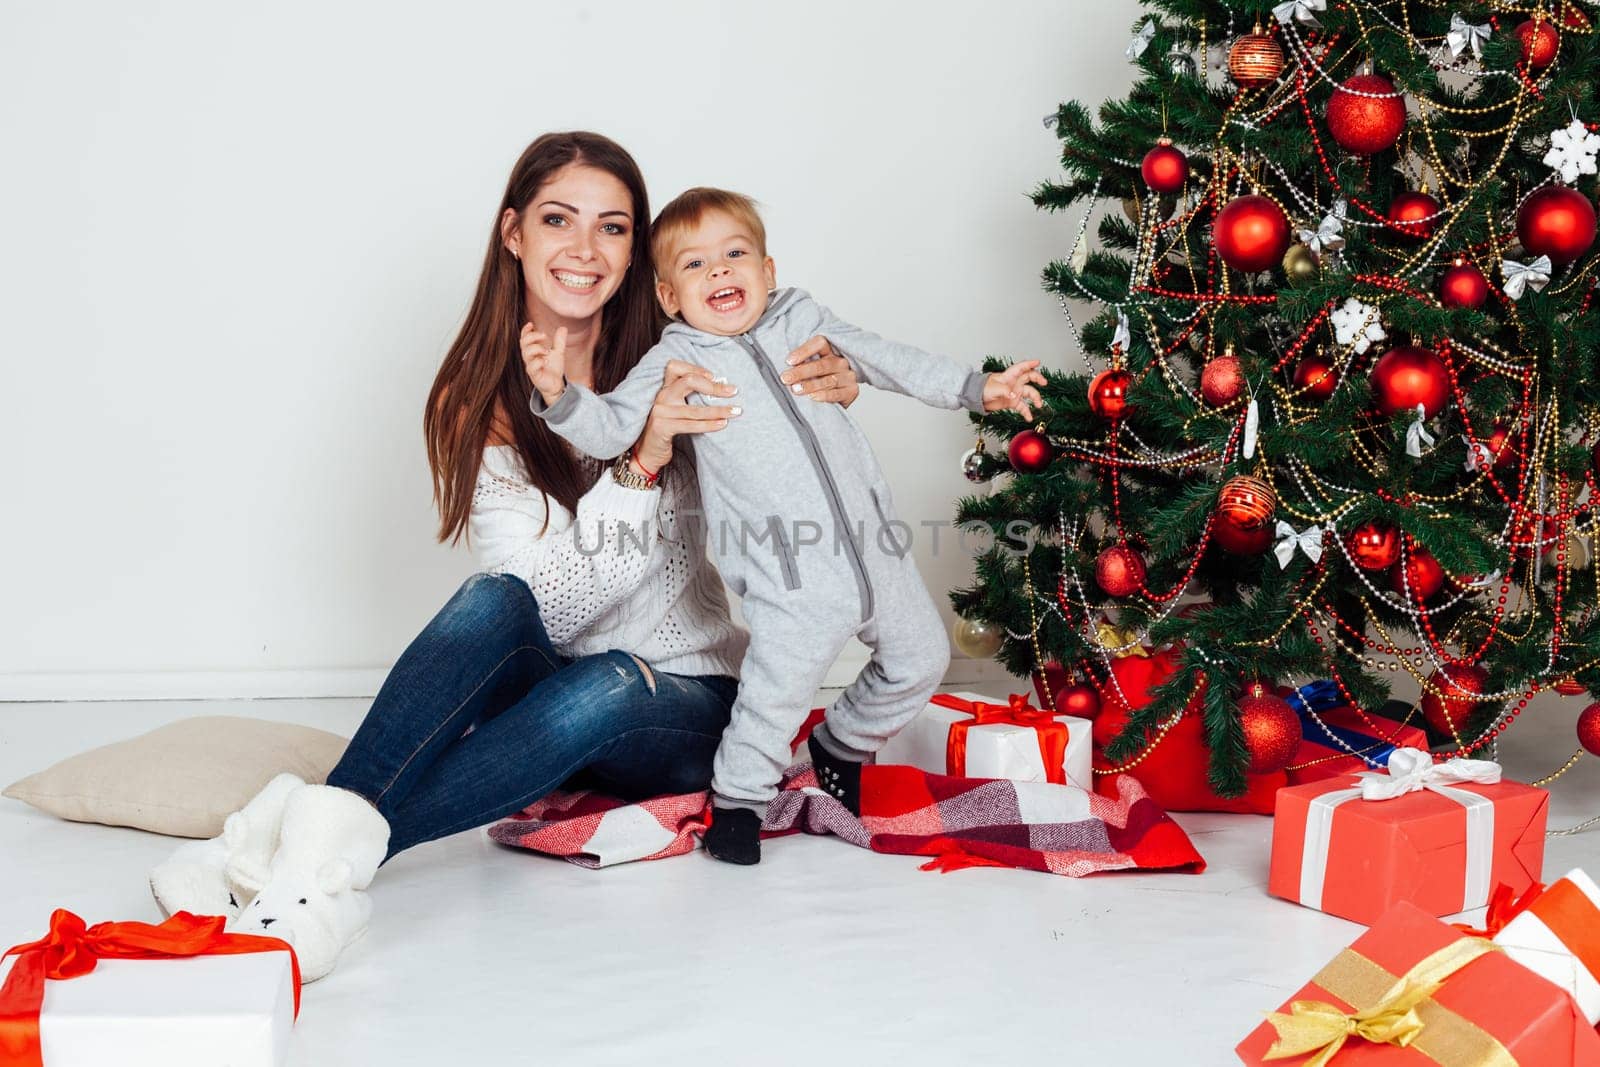 mother and little boy at Christmas tree with gifts